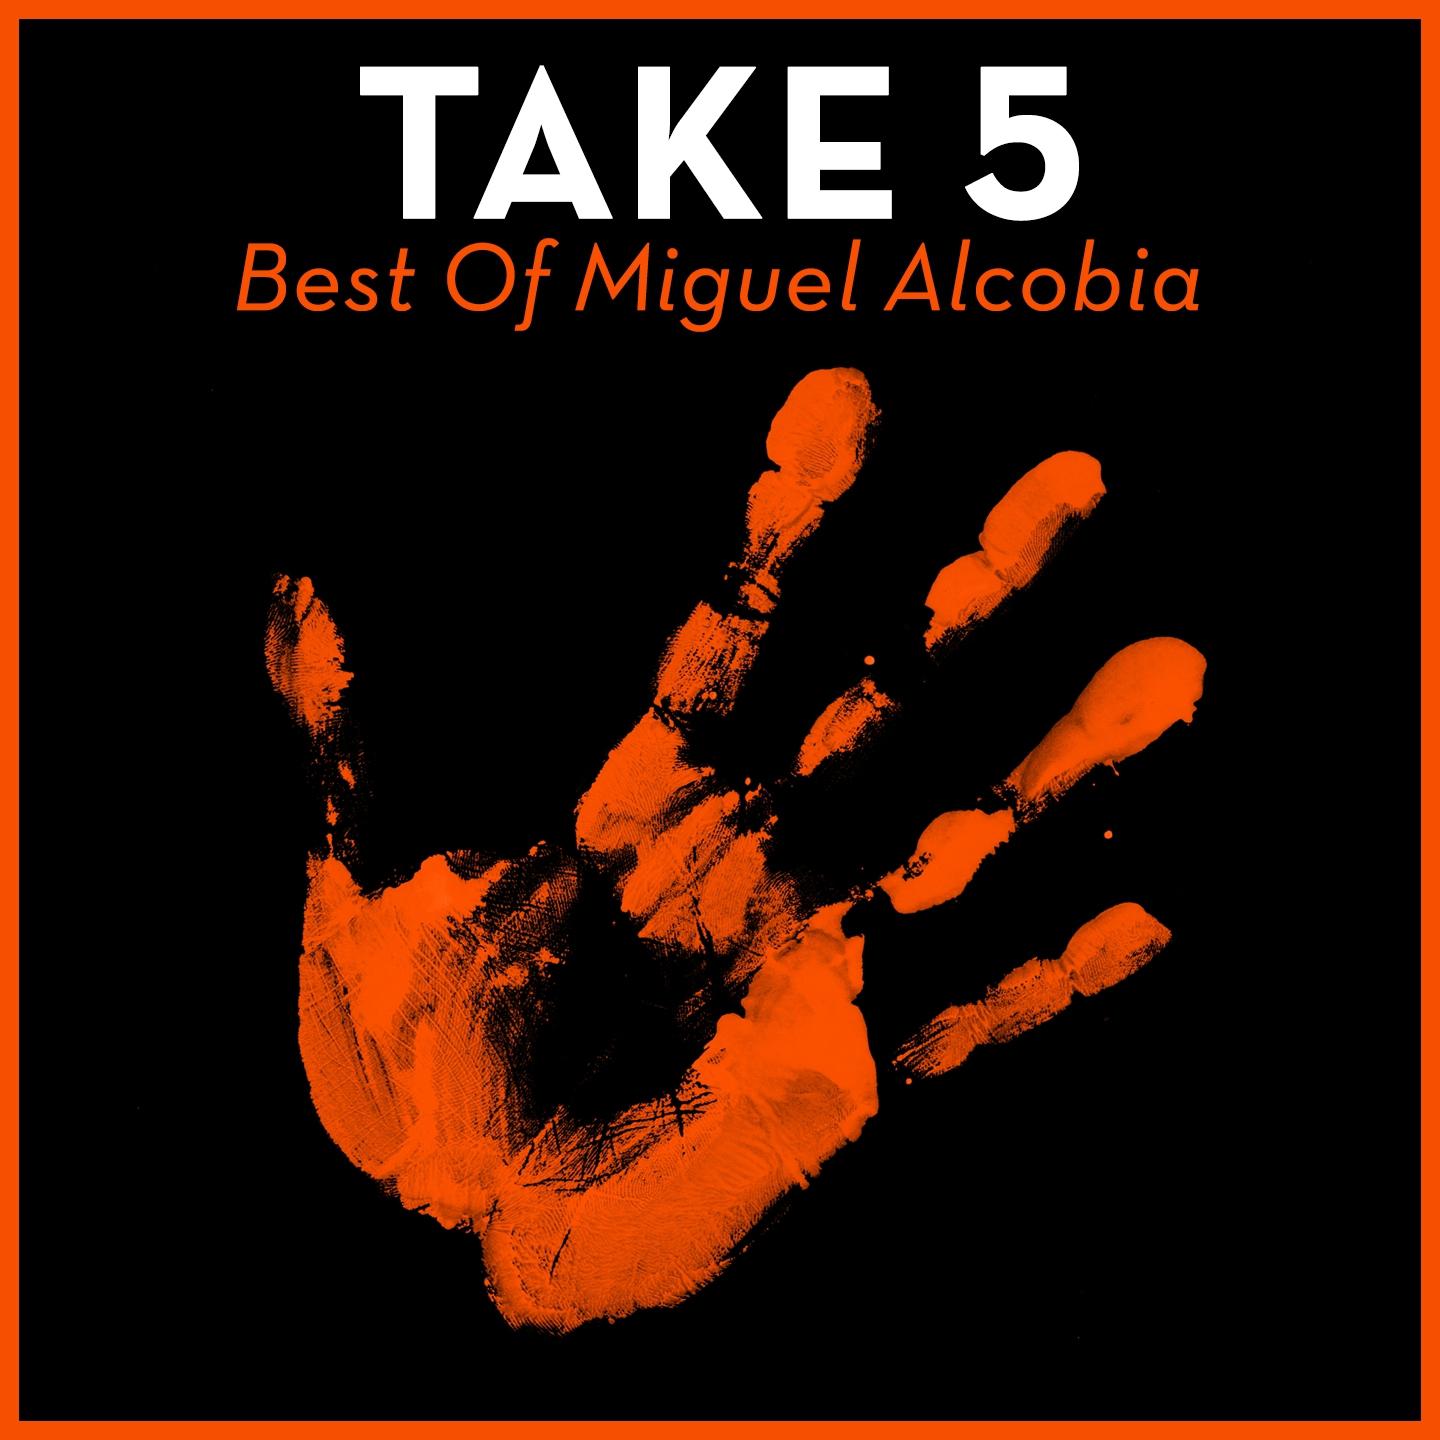 Take 5 - Best Of Miguel Alcobia